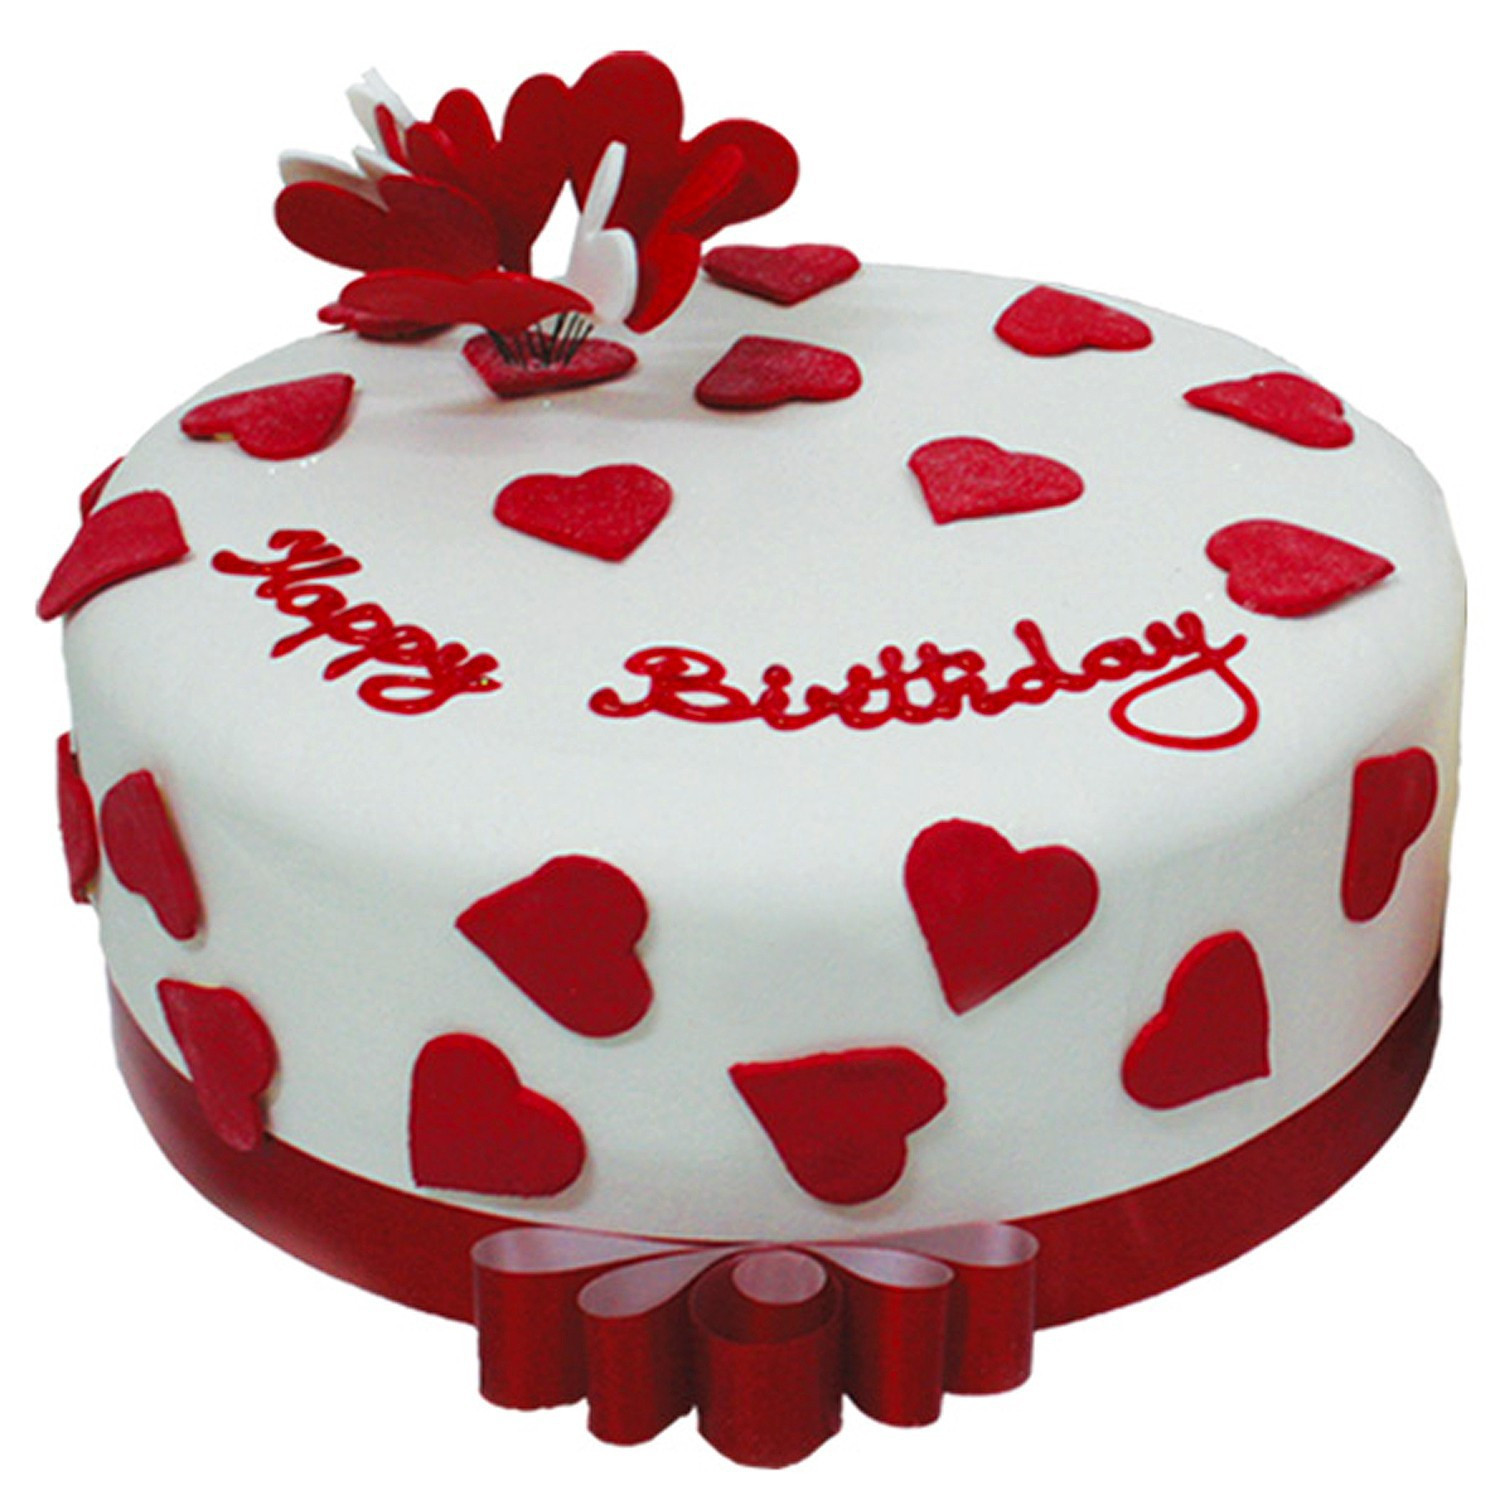 Heart Birthday Cake
 Heart birthday cake wallpapers and images wallpapers